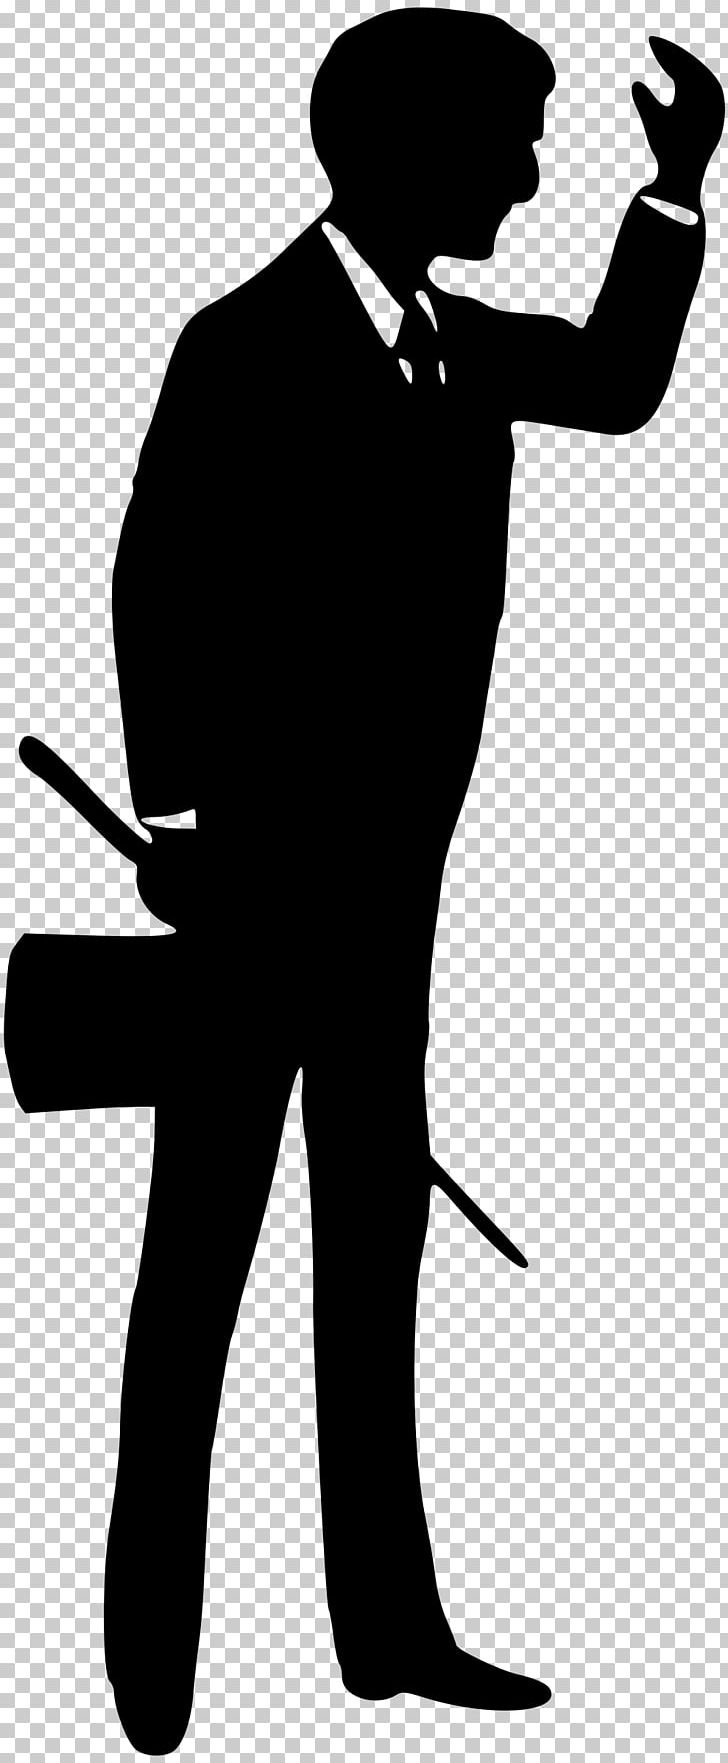 YouTube Silhouette Gentleman PNG, Clipart, Black, Black And White, Drawing, Gentleman, Headgear Free PNG Download